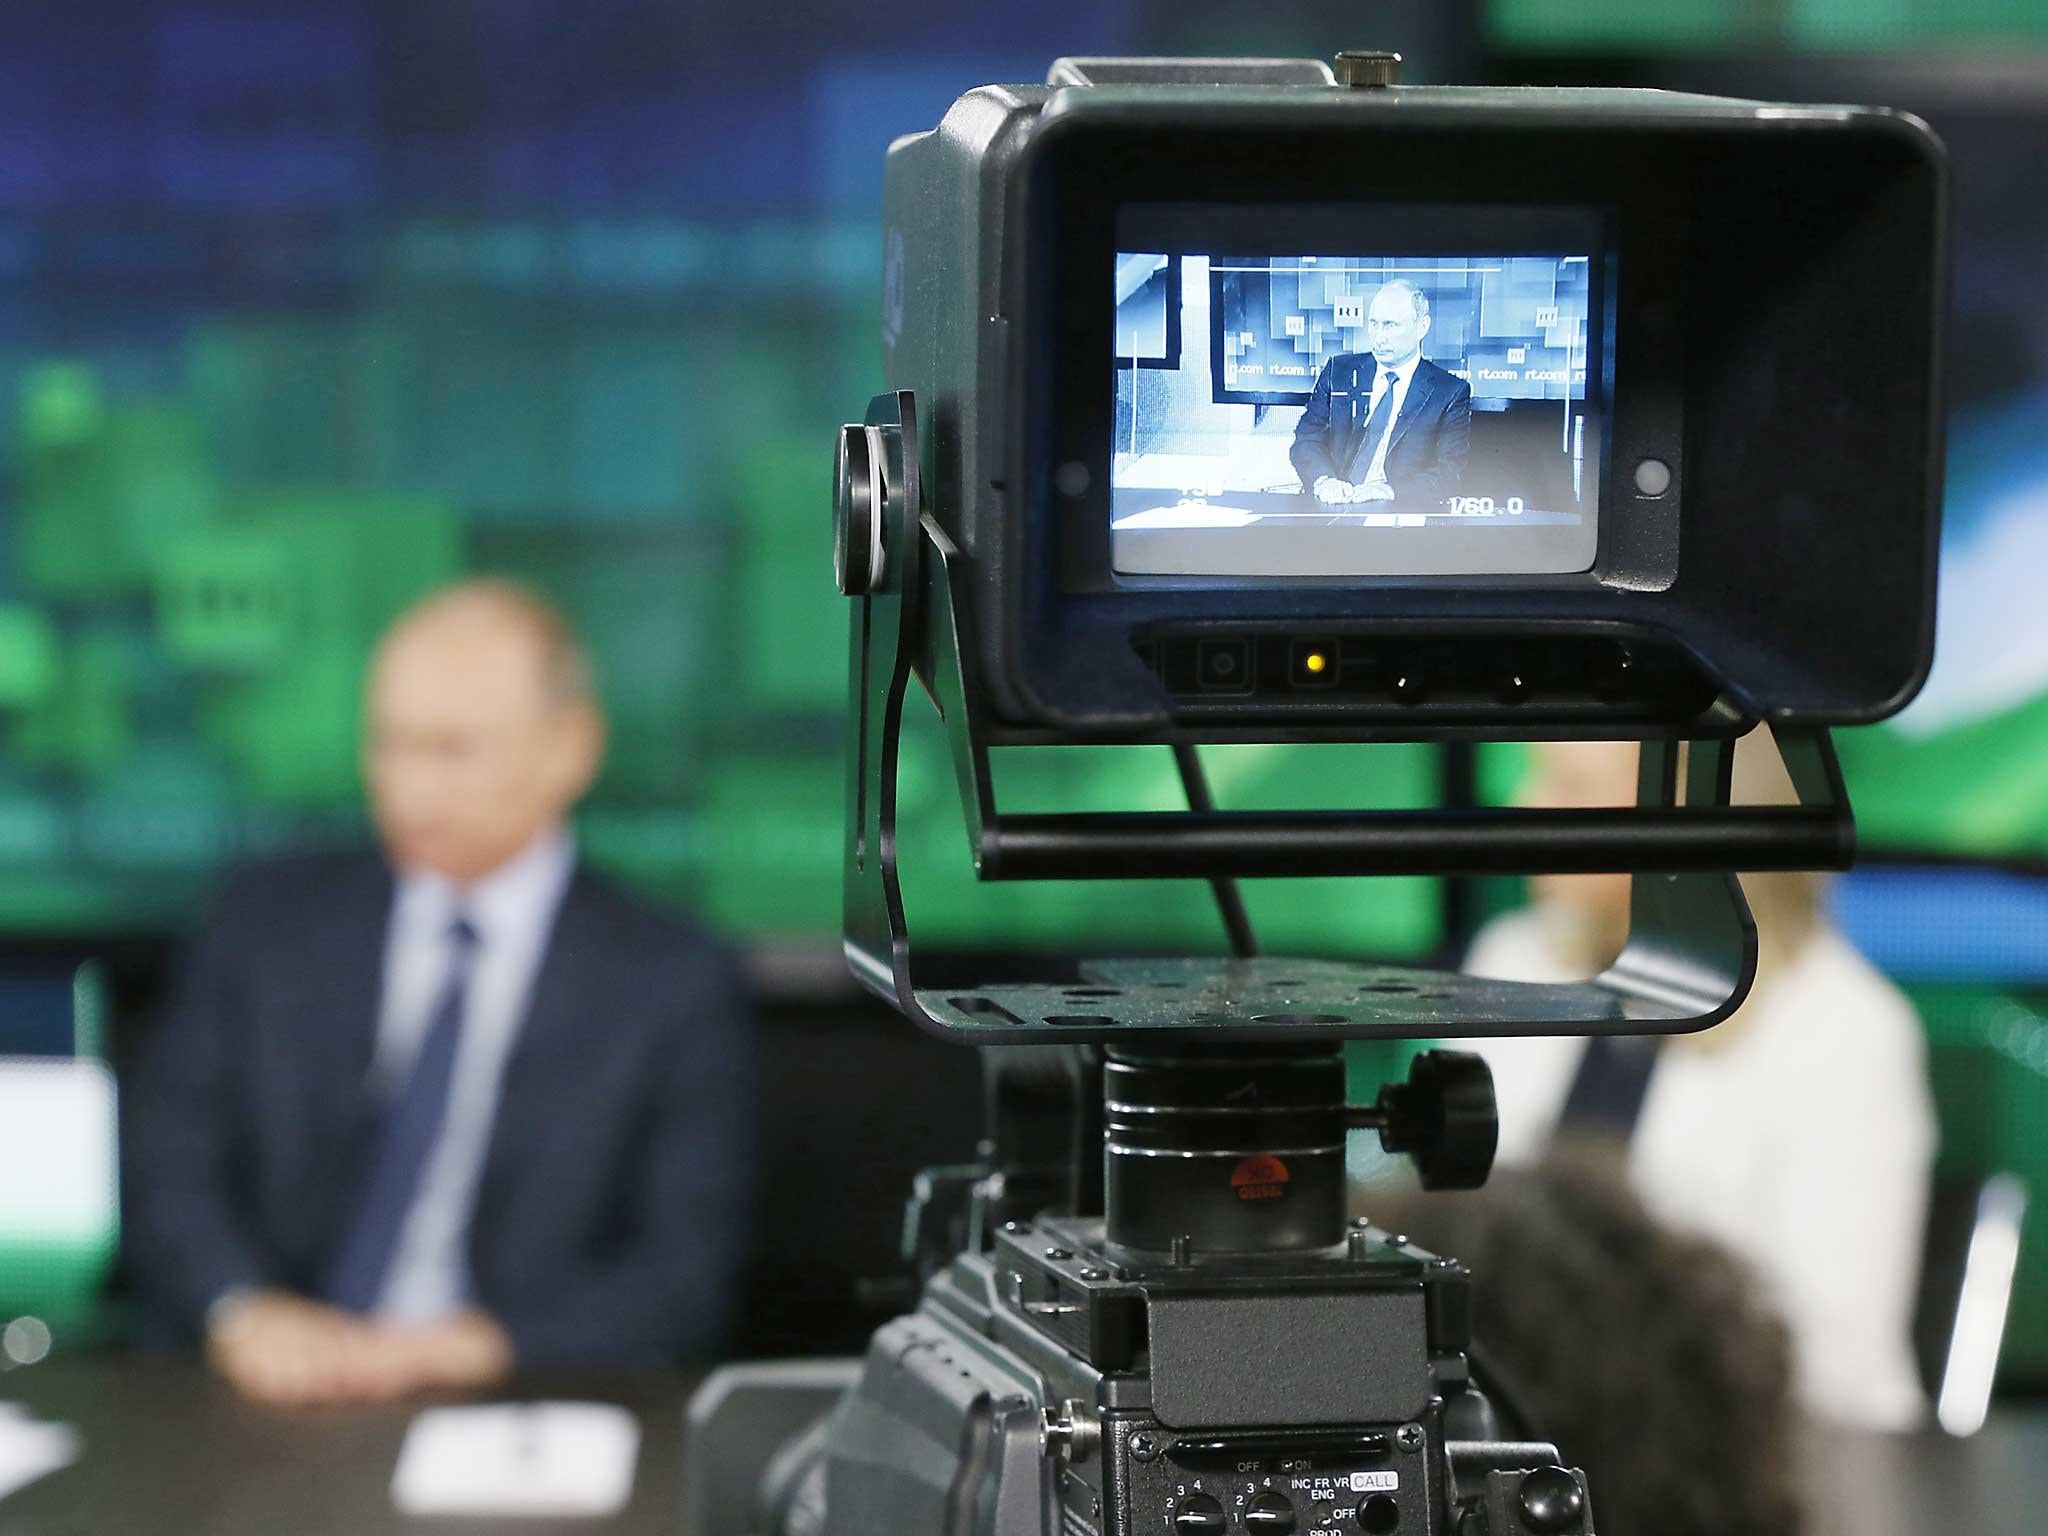 When Vladimir Putin was interviewed in RT's Moscow studio in 2013, he insisted the network was 'funded by the government' but 'absolutely independent' editorially